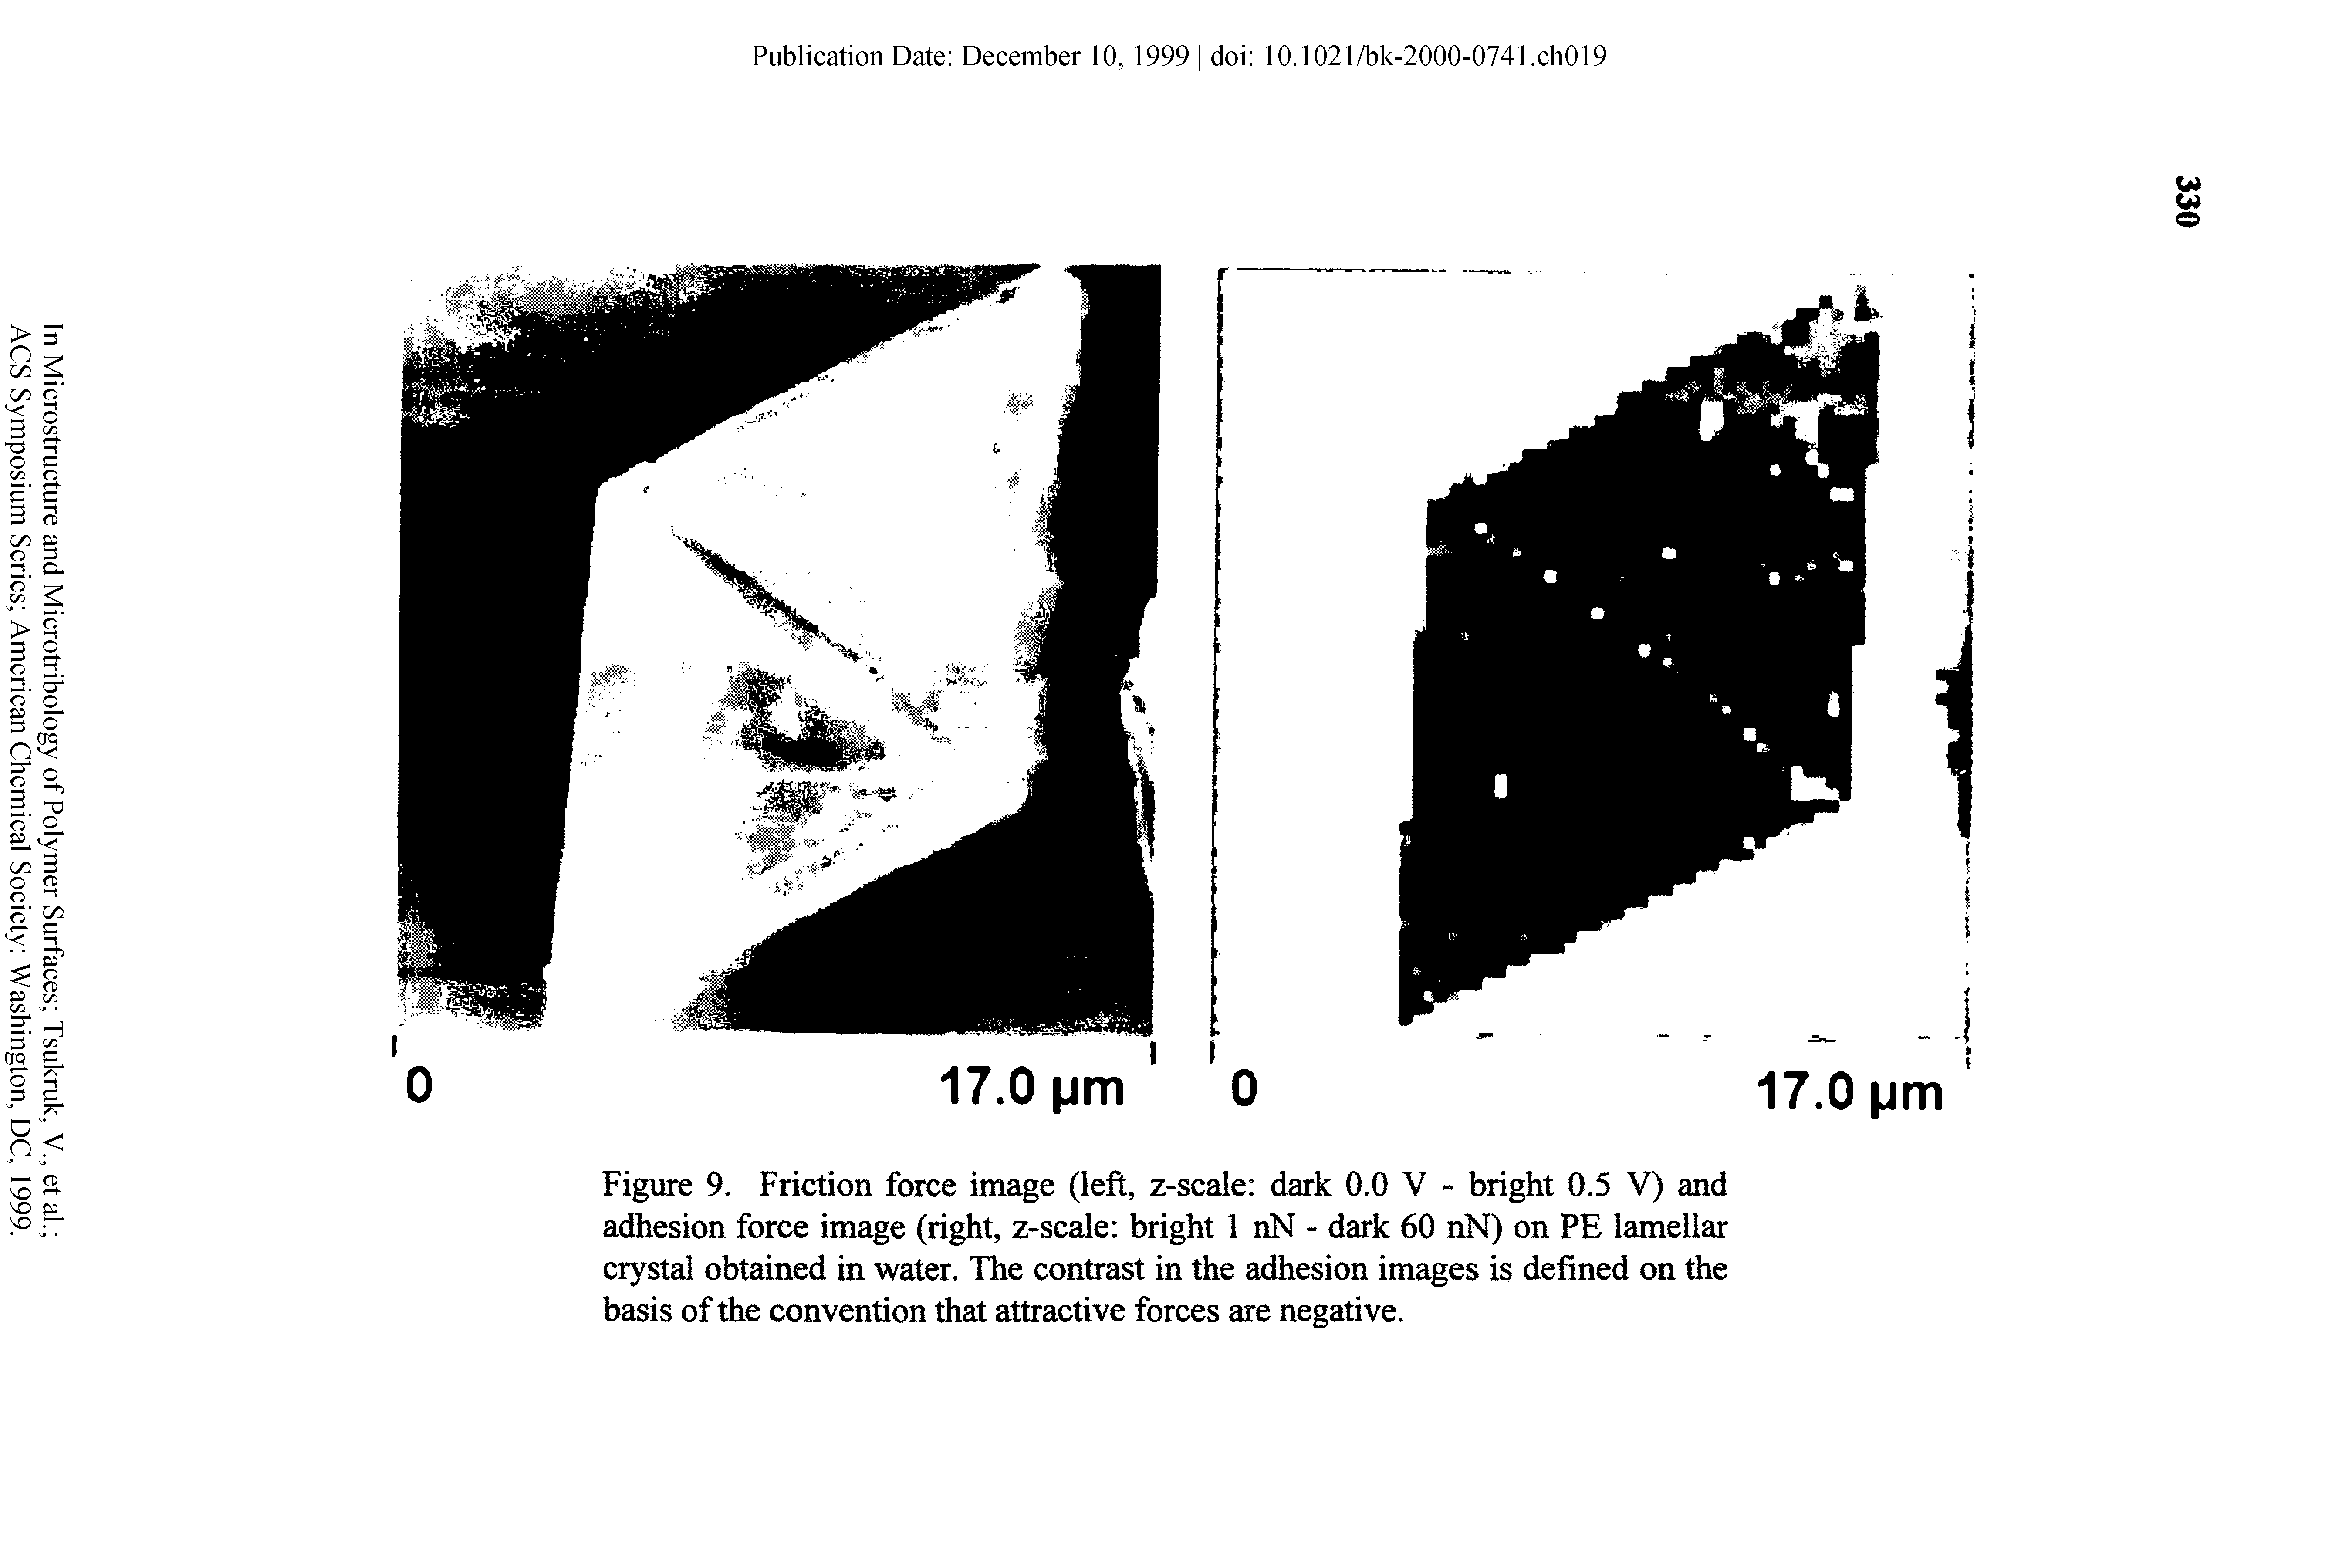 Figure 9. Friction force image (left, z-scale dark 0.0 V - bright 0.5 V) and adhesion force image (right, z-scale bright 1 nN - dark 60 nN) on PE lamellar crystal obtained in water. The contrast in the adhesion images is defined on the basis of the convention that attractive forces are negative.